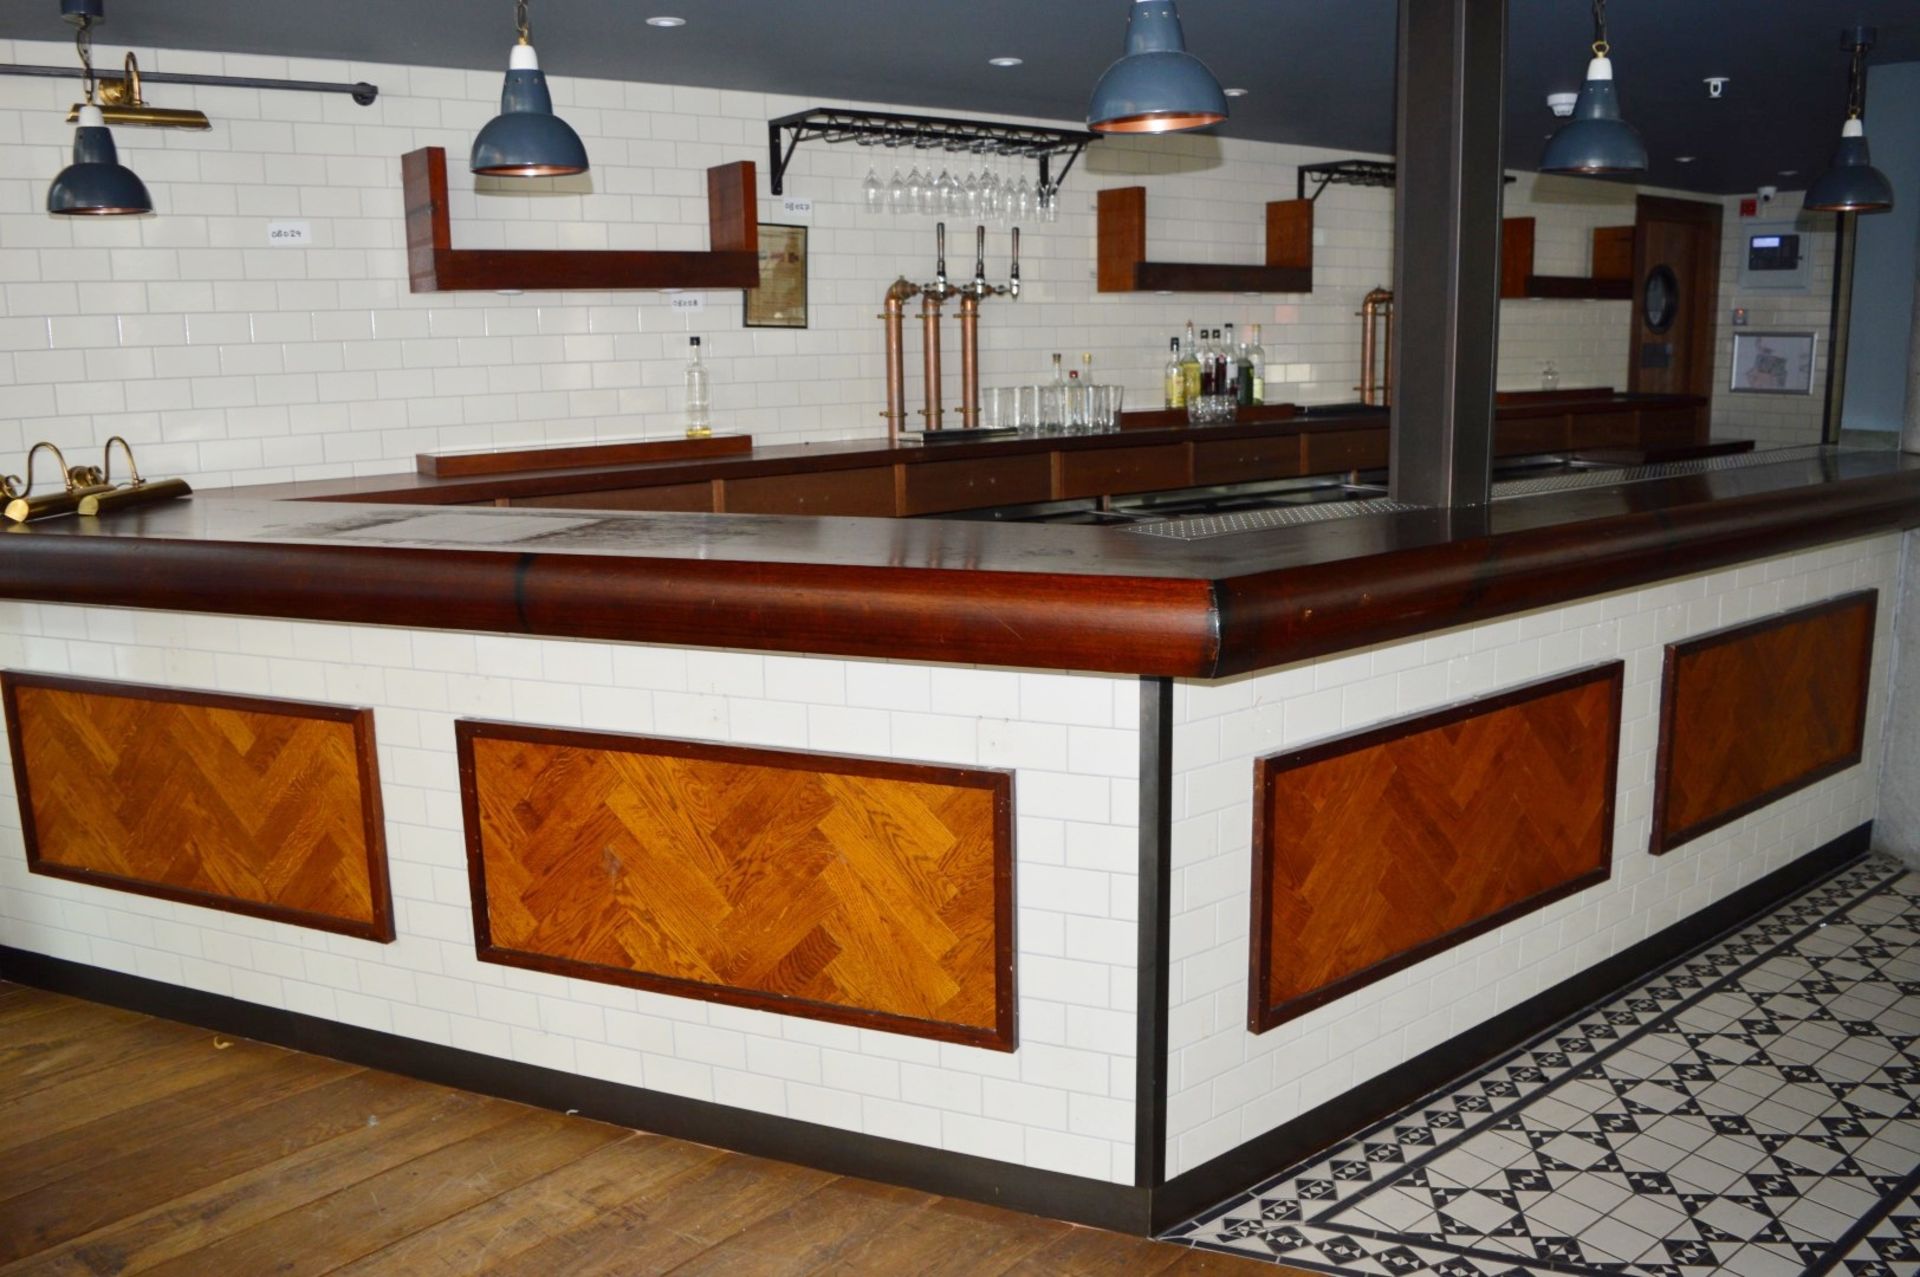 1 x Large Pub / Restuarant Bar With Tiled Front and Framed Parquet Flooring Design - Also Includes - Image 6 of 25